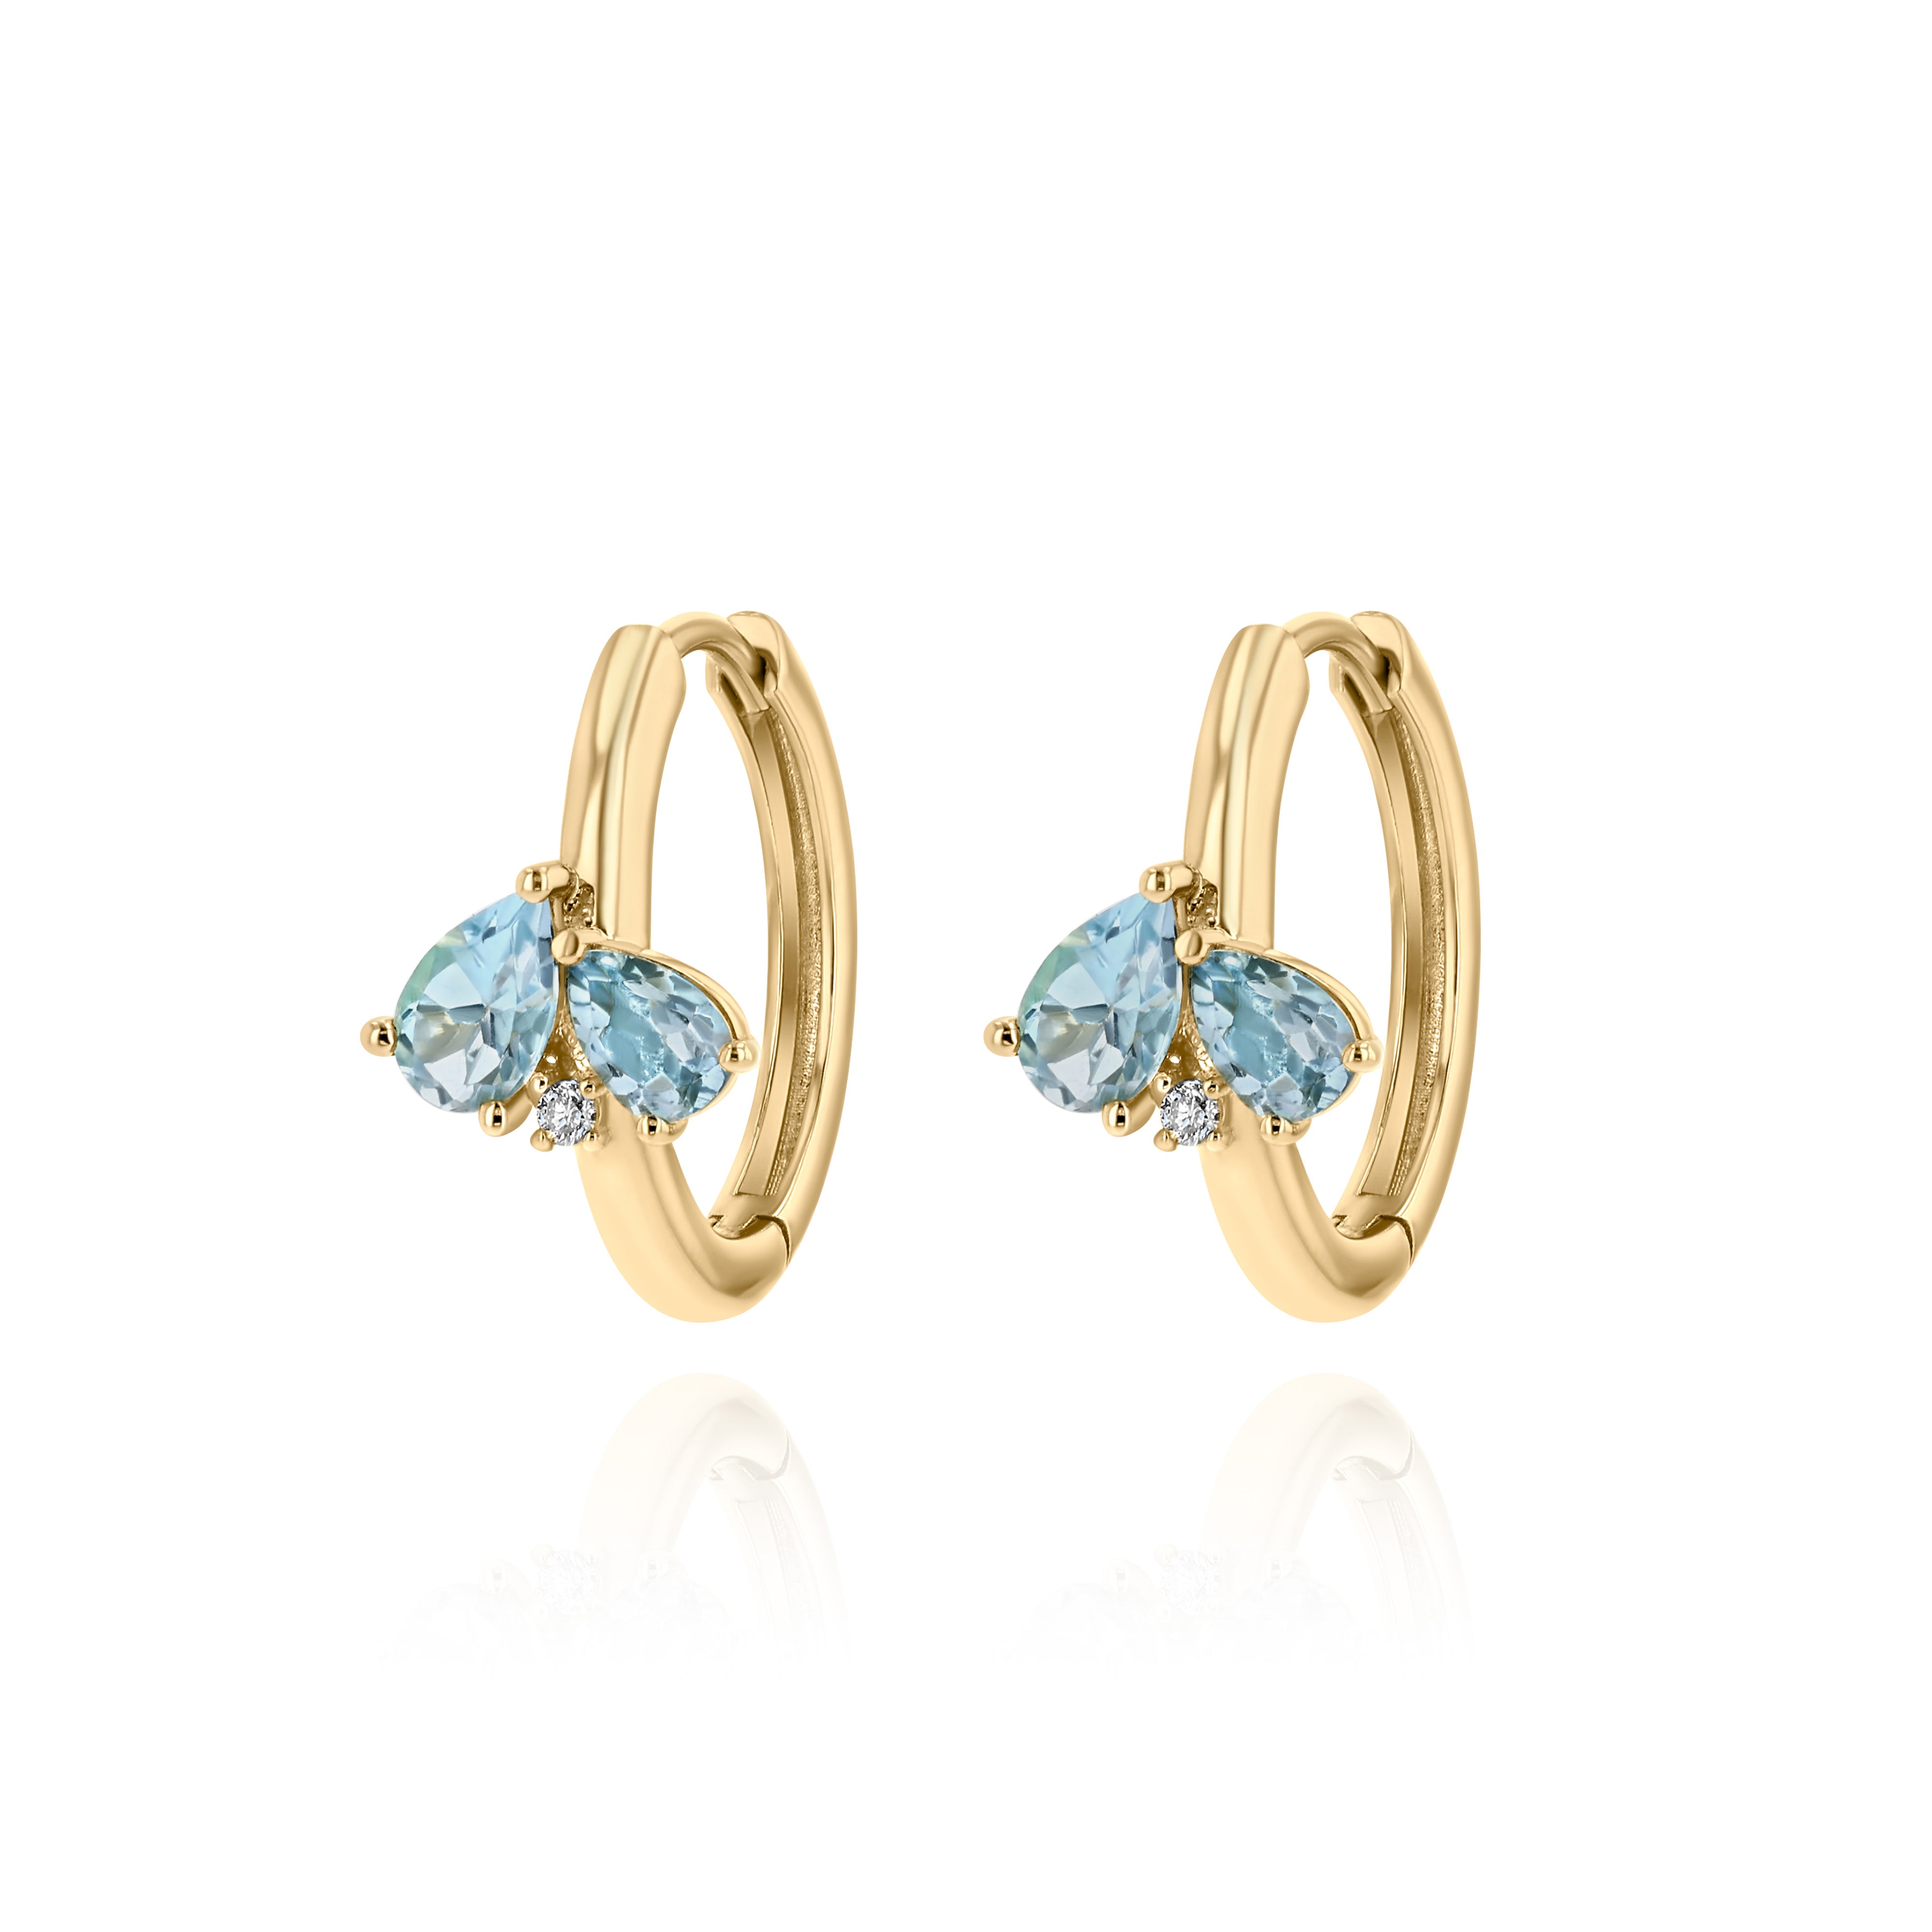 Yellow Gold hoop Earrings with pear shaped Topaz, and a small round Diamond, Medium